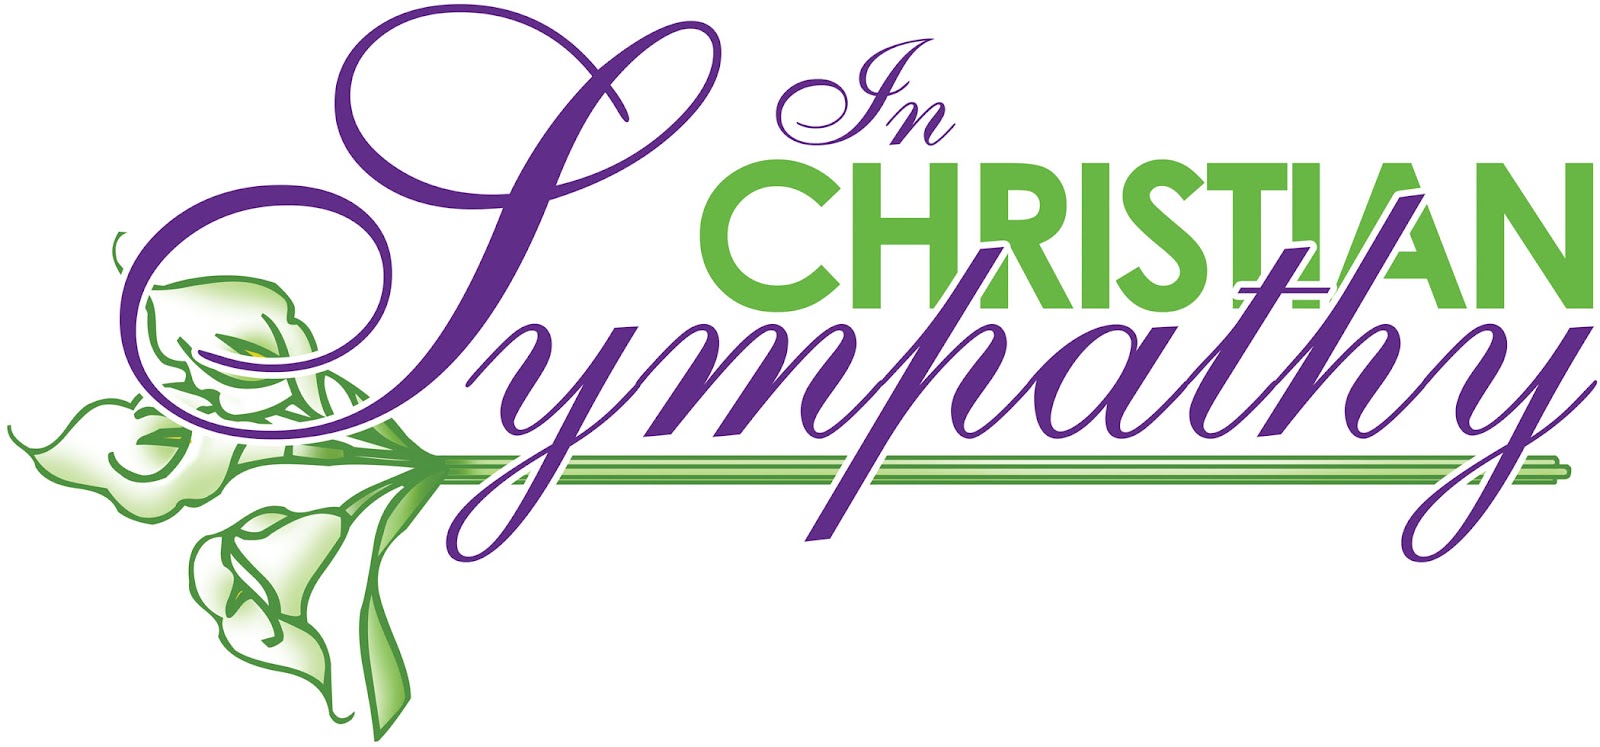 Free christian clipart in sympathy